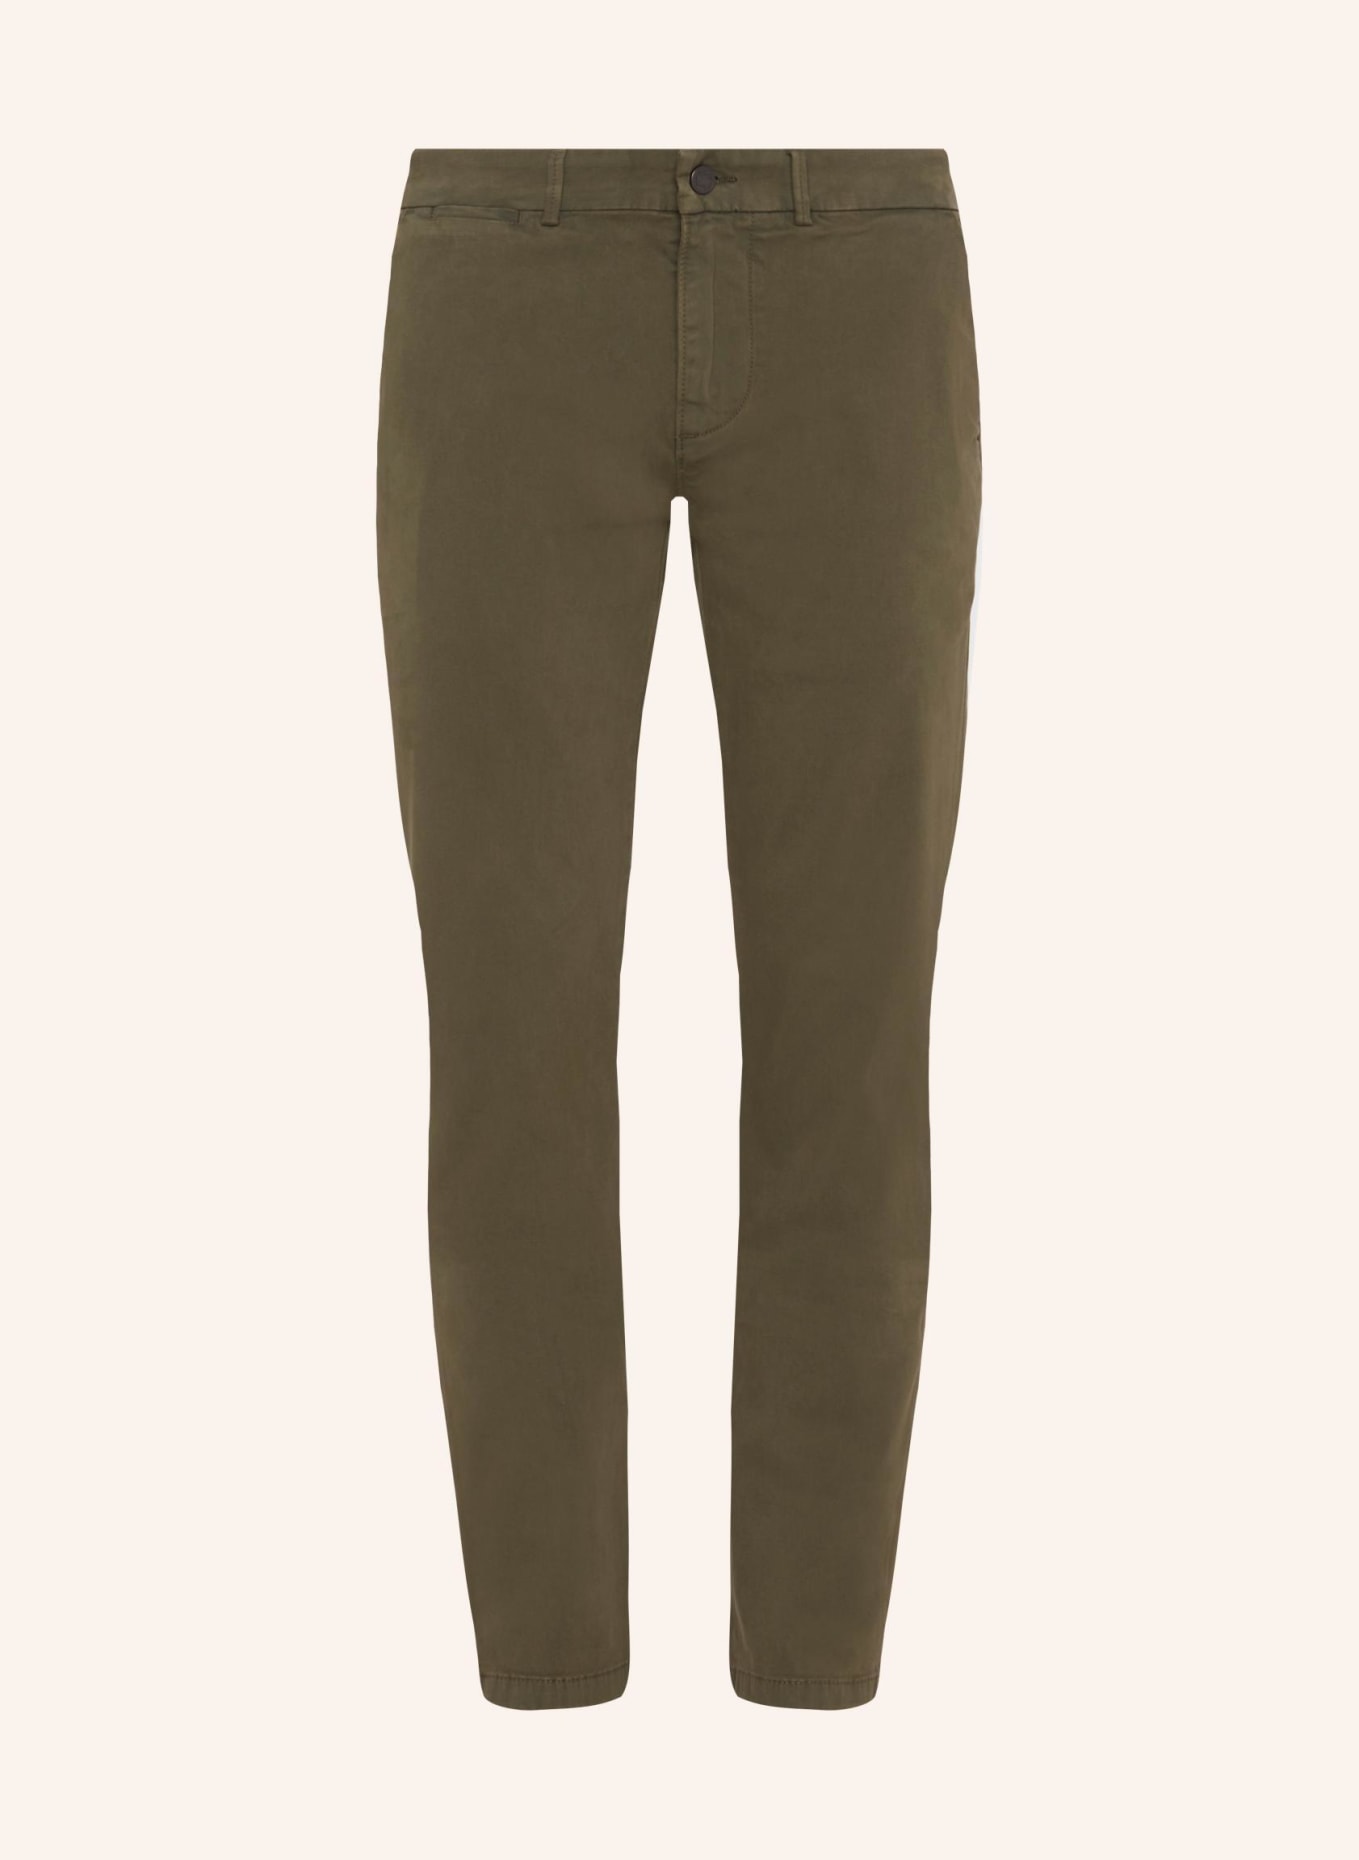 7 for all mankind Pants SLIMMY CHINO TAPERED, Farbe: GRÜN (Bild 1)